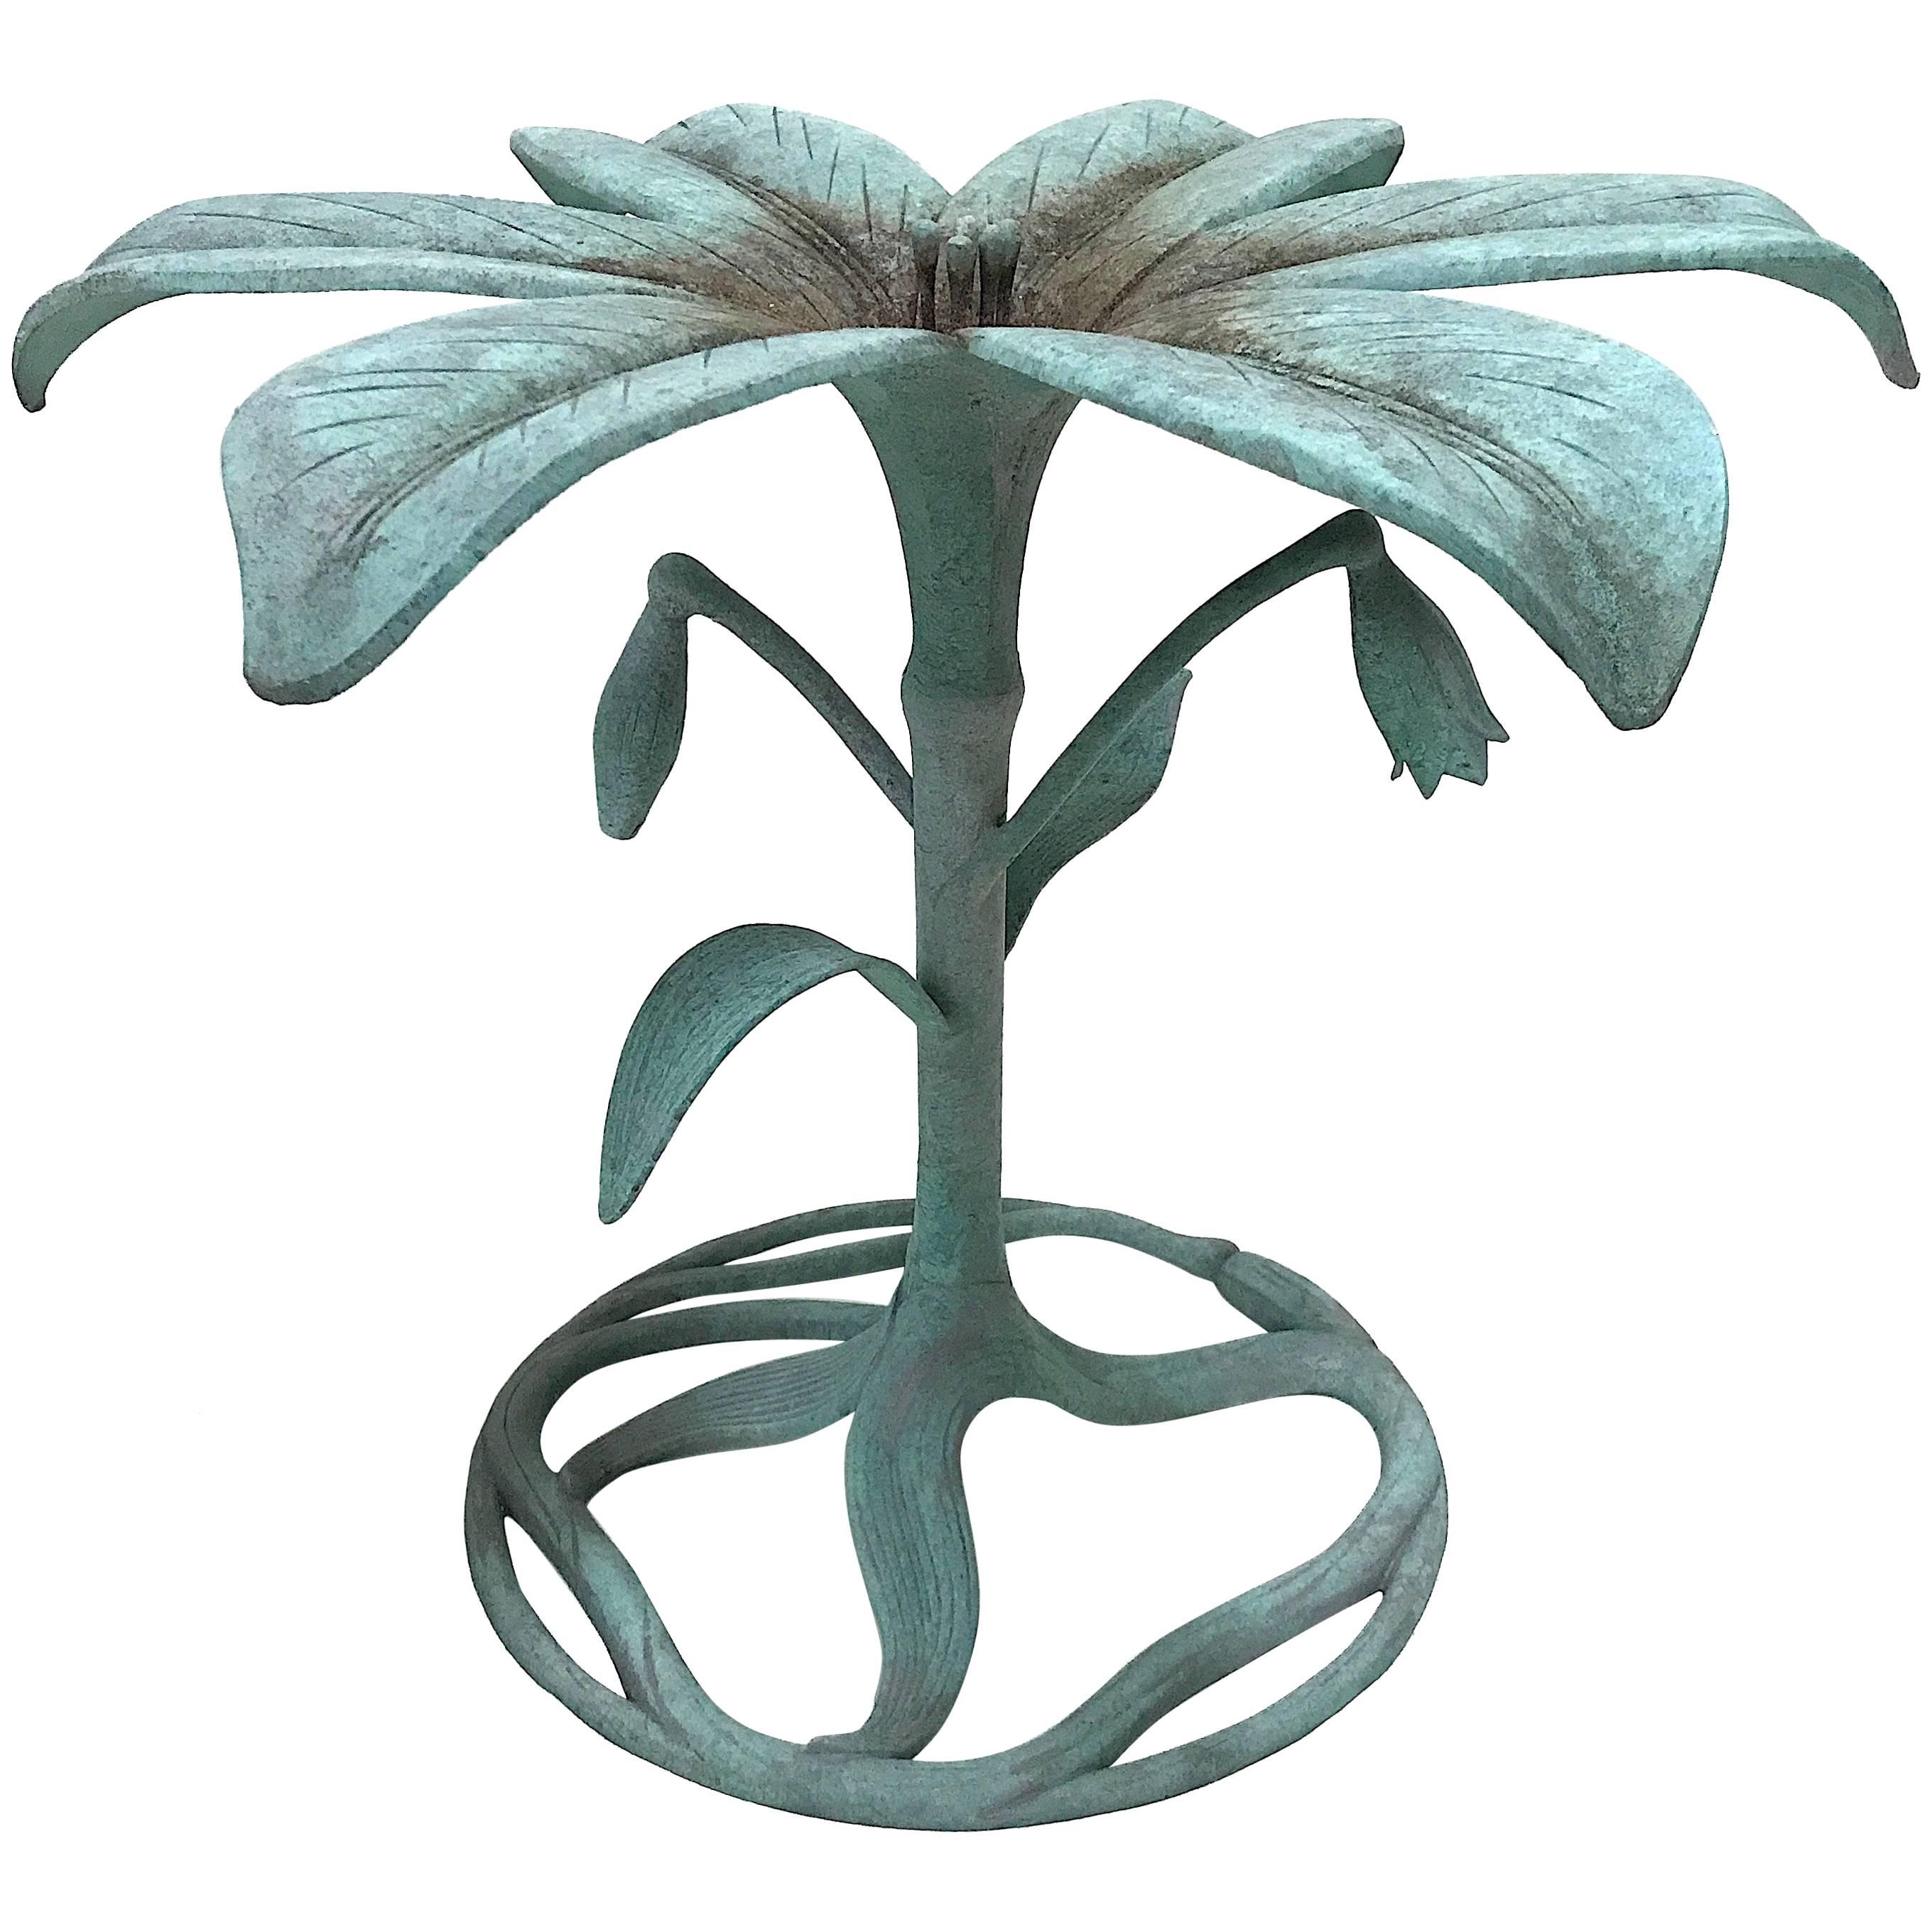 Verdigris Arthur Court ‘Lily’ Dining Table for Garden or Interiors